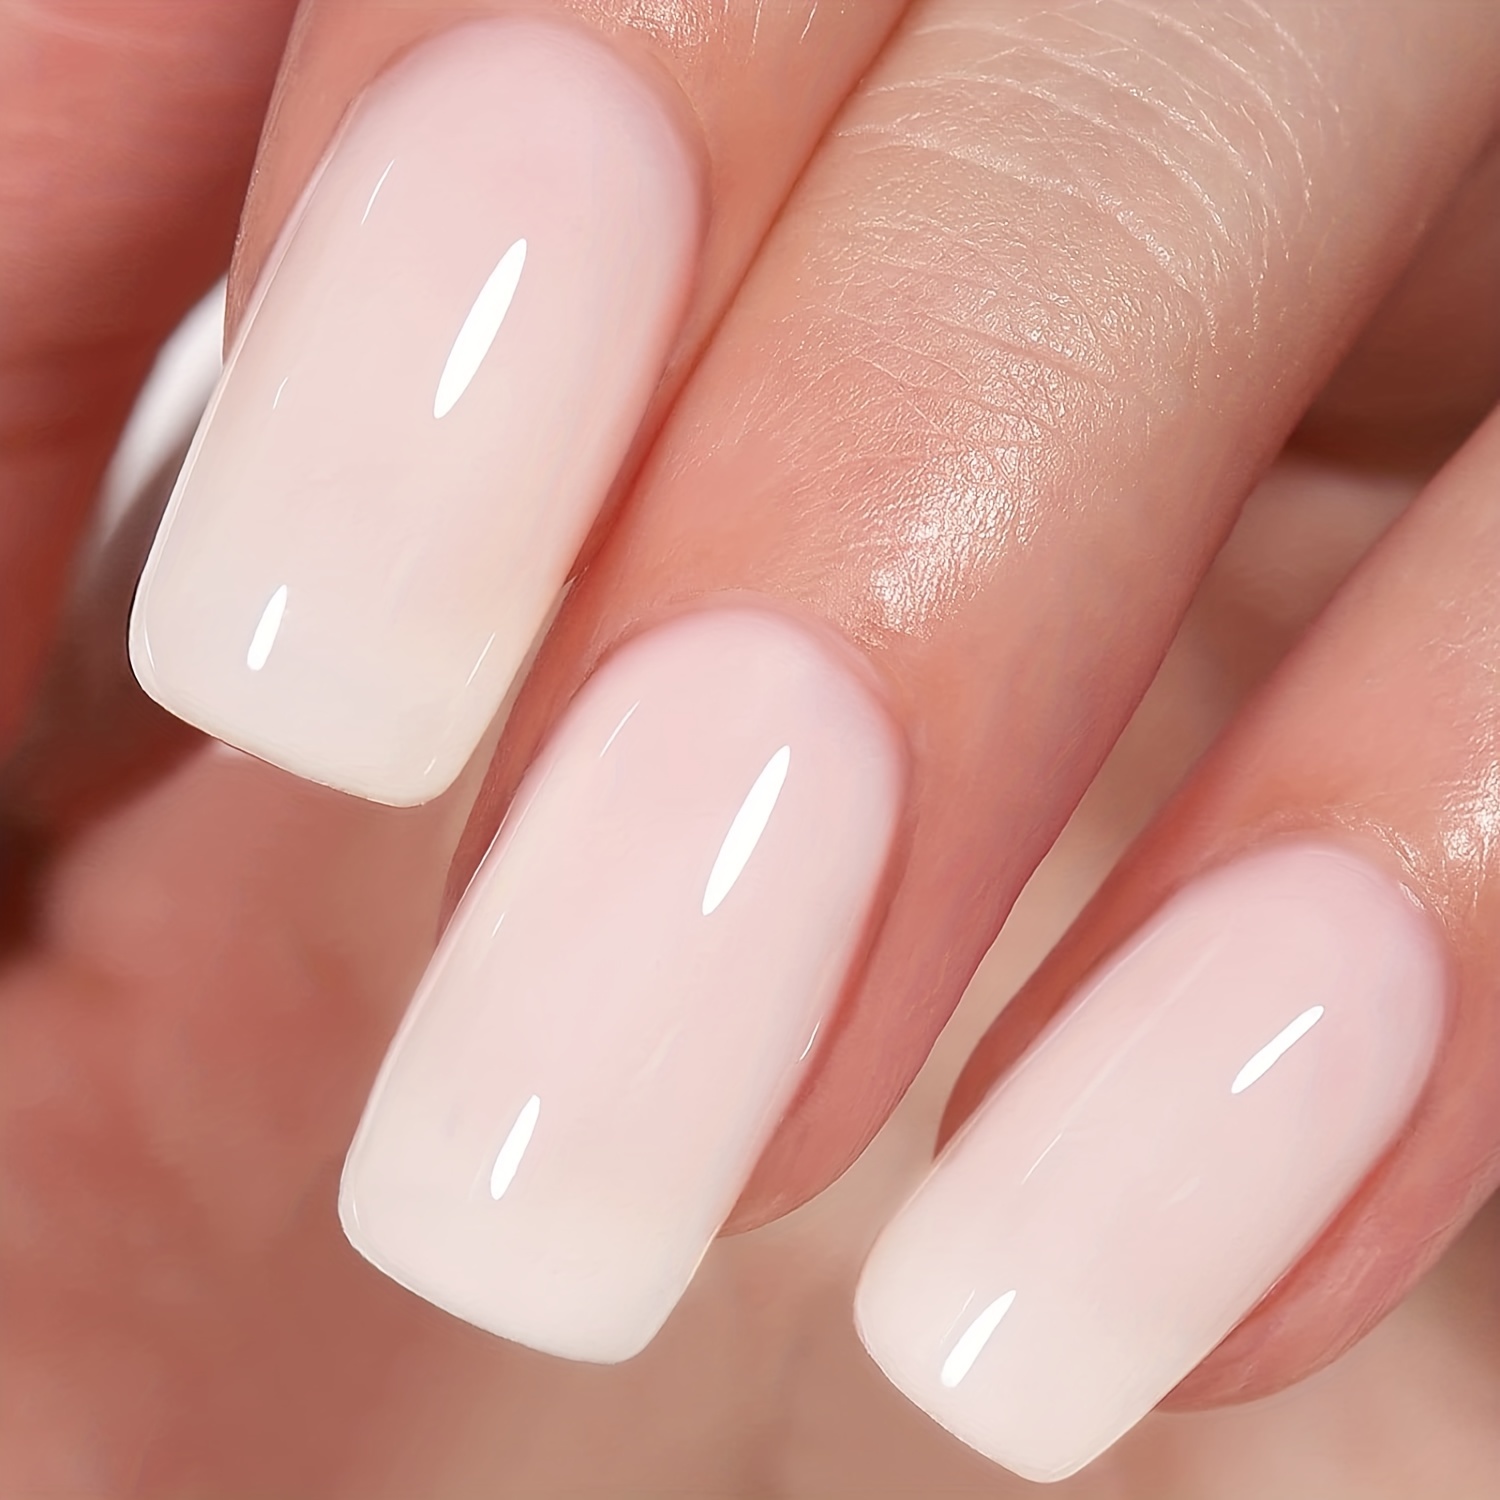 Nails design is in the form of square, color is natural pink, red and white.  A